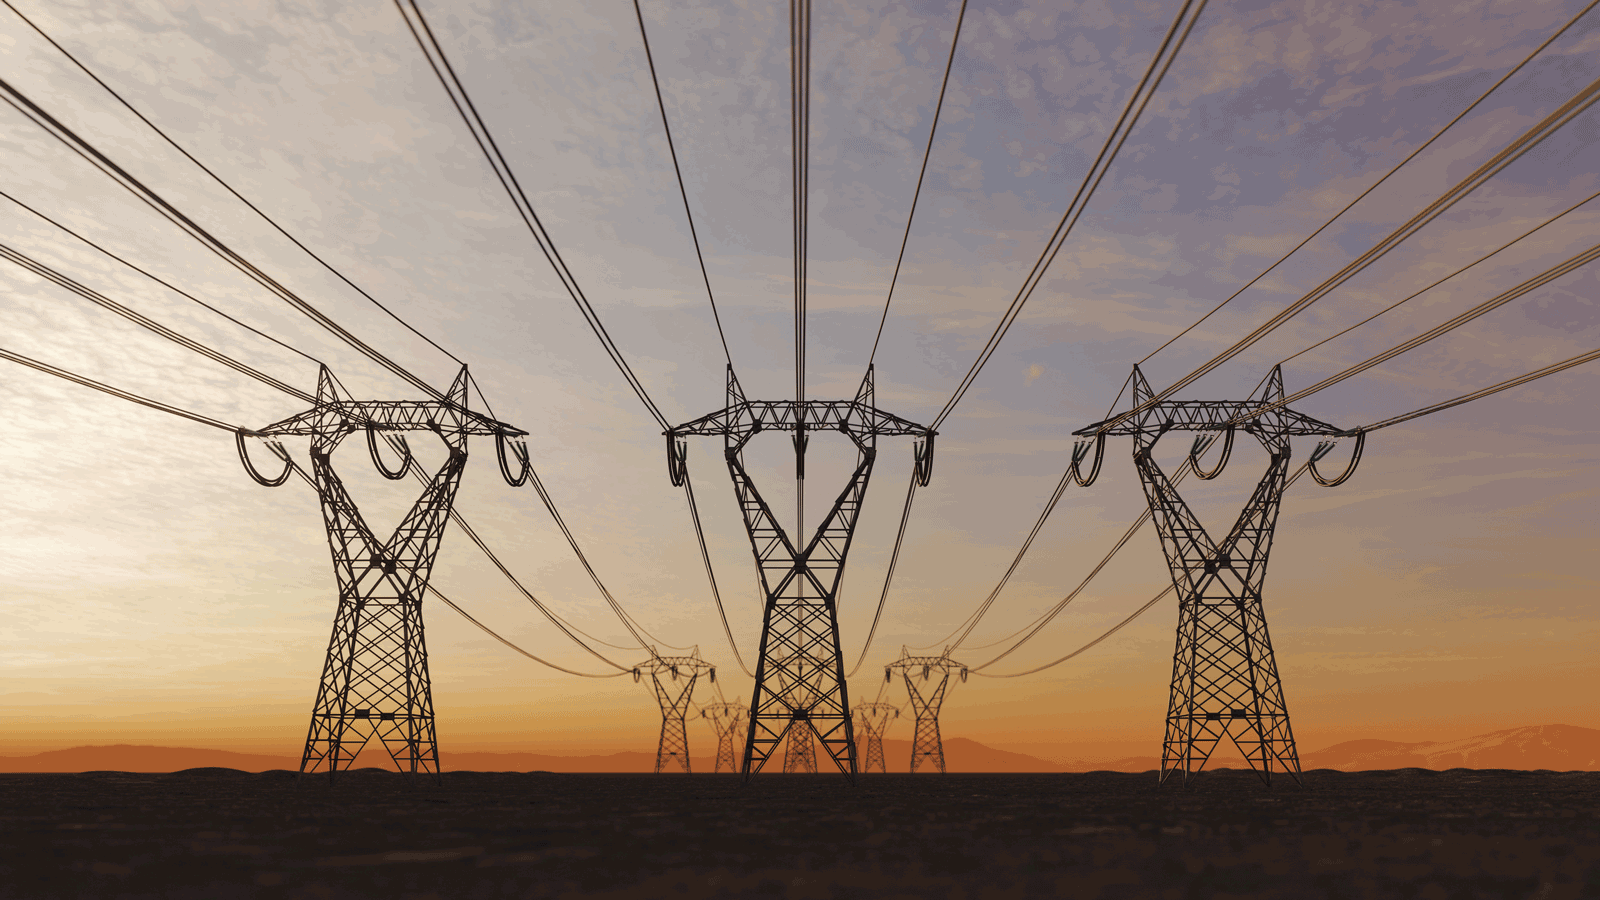 200 clean energy projects to see grid connection dates brought forward under new scheme